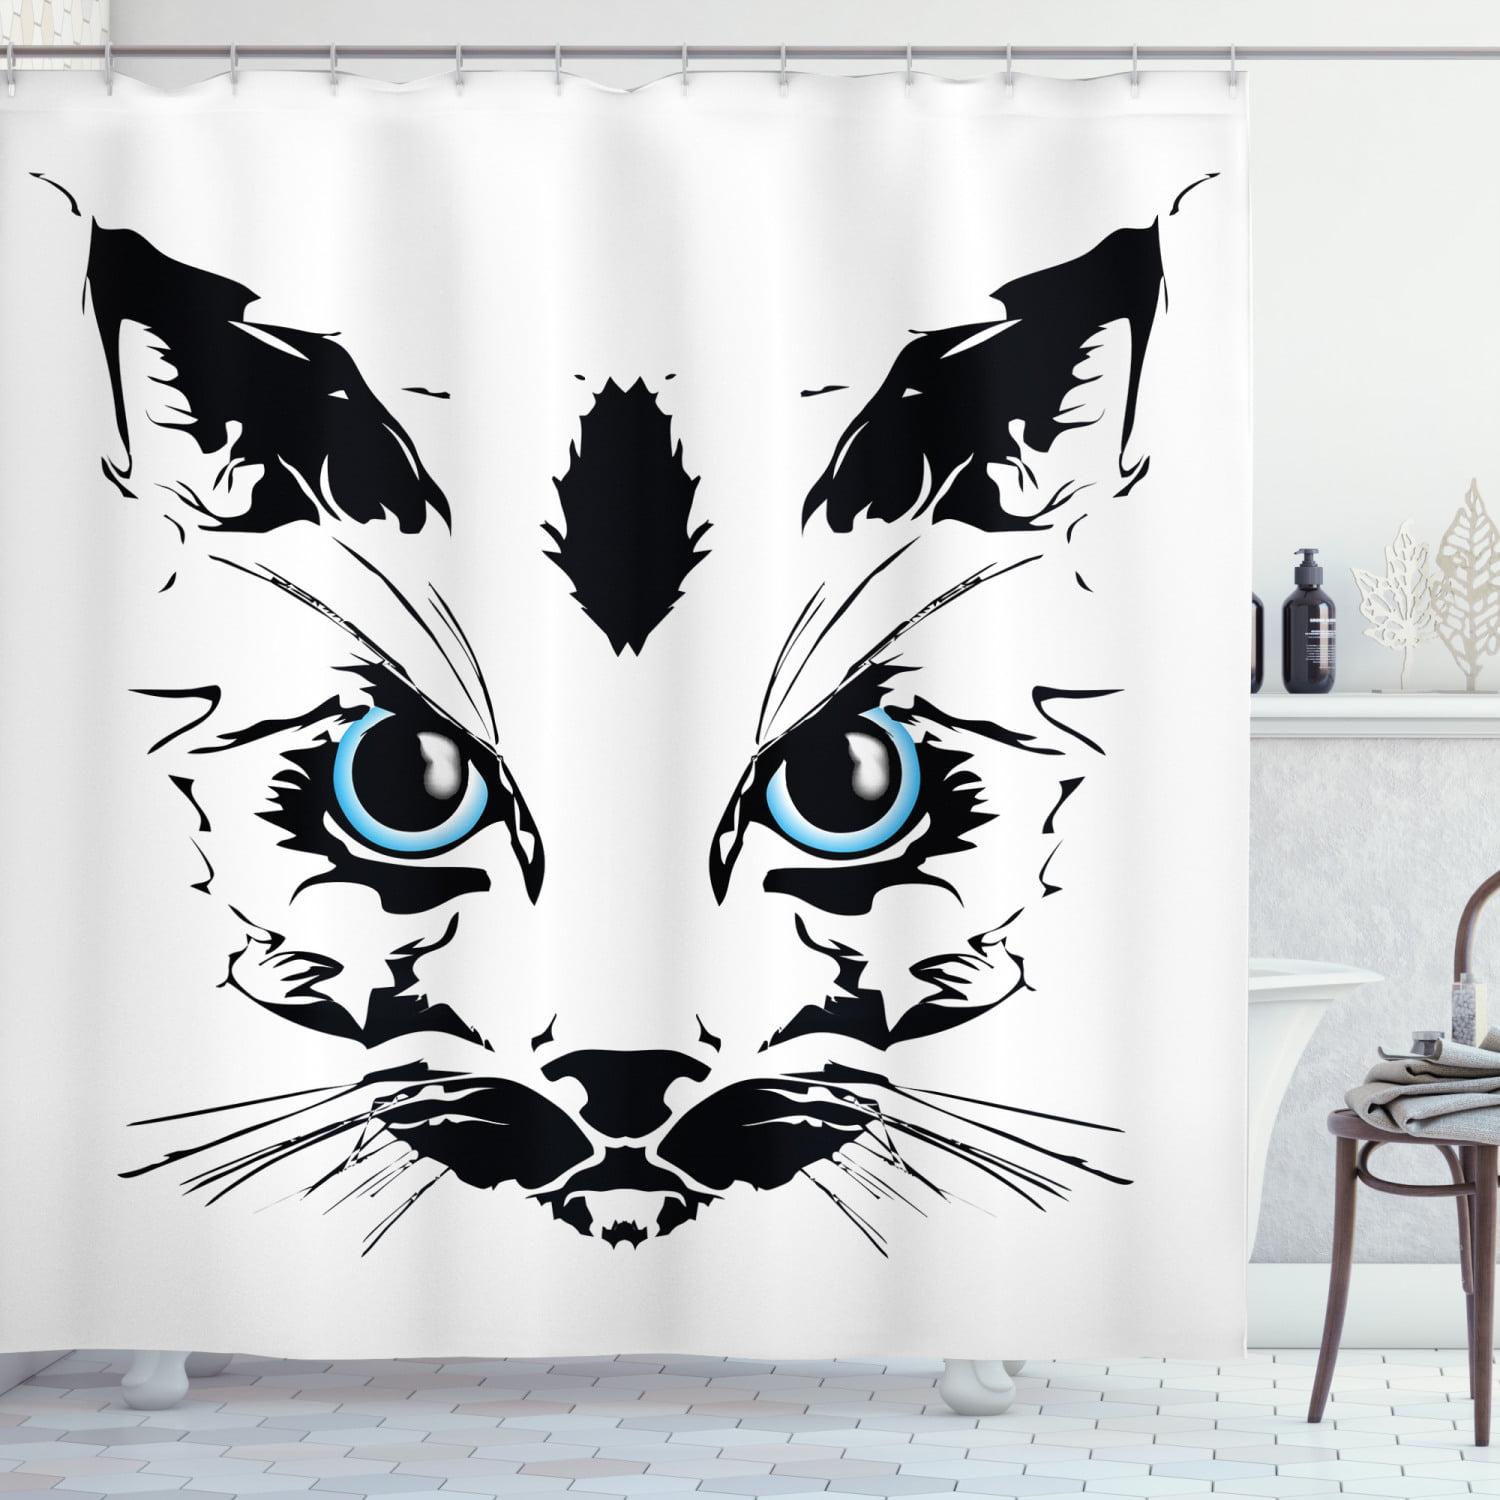 Lovely Kitty Cat Face Shower Curtain Waterproof Bath Decor with 12 Hooks 